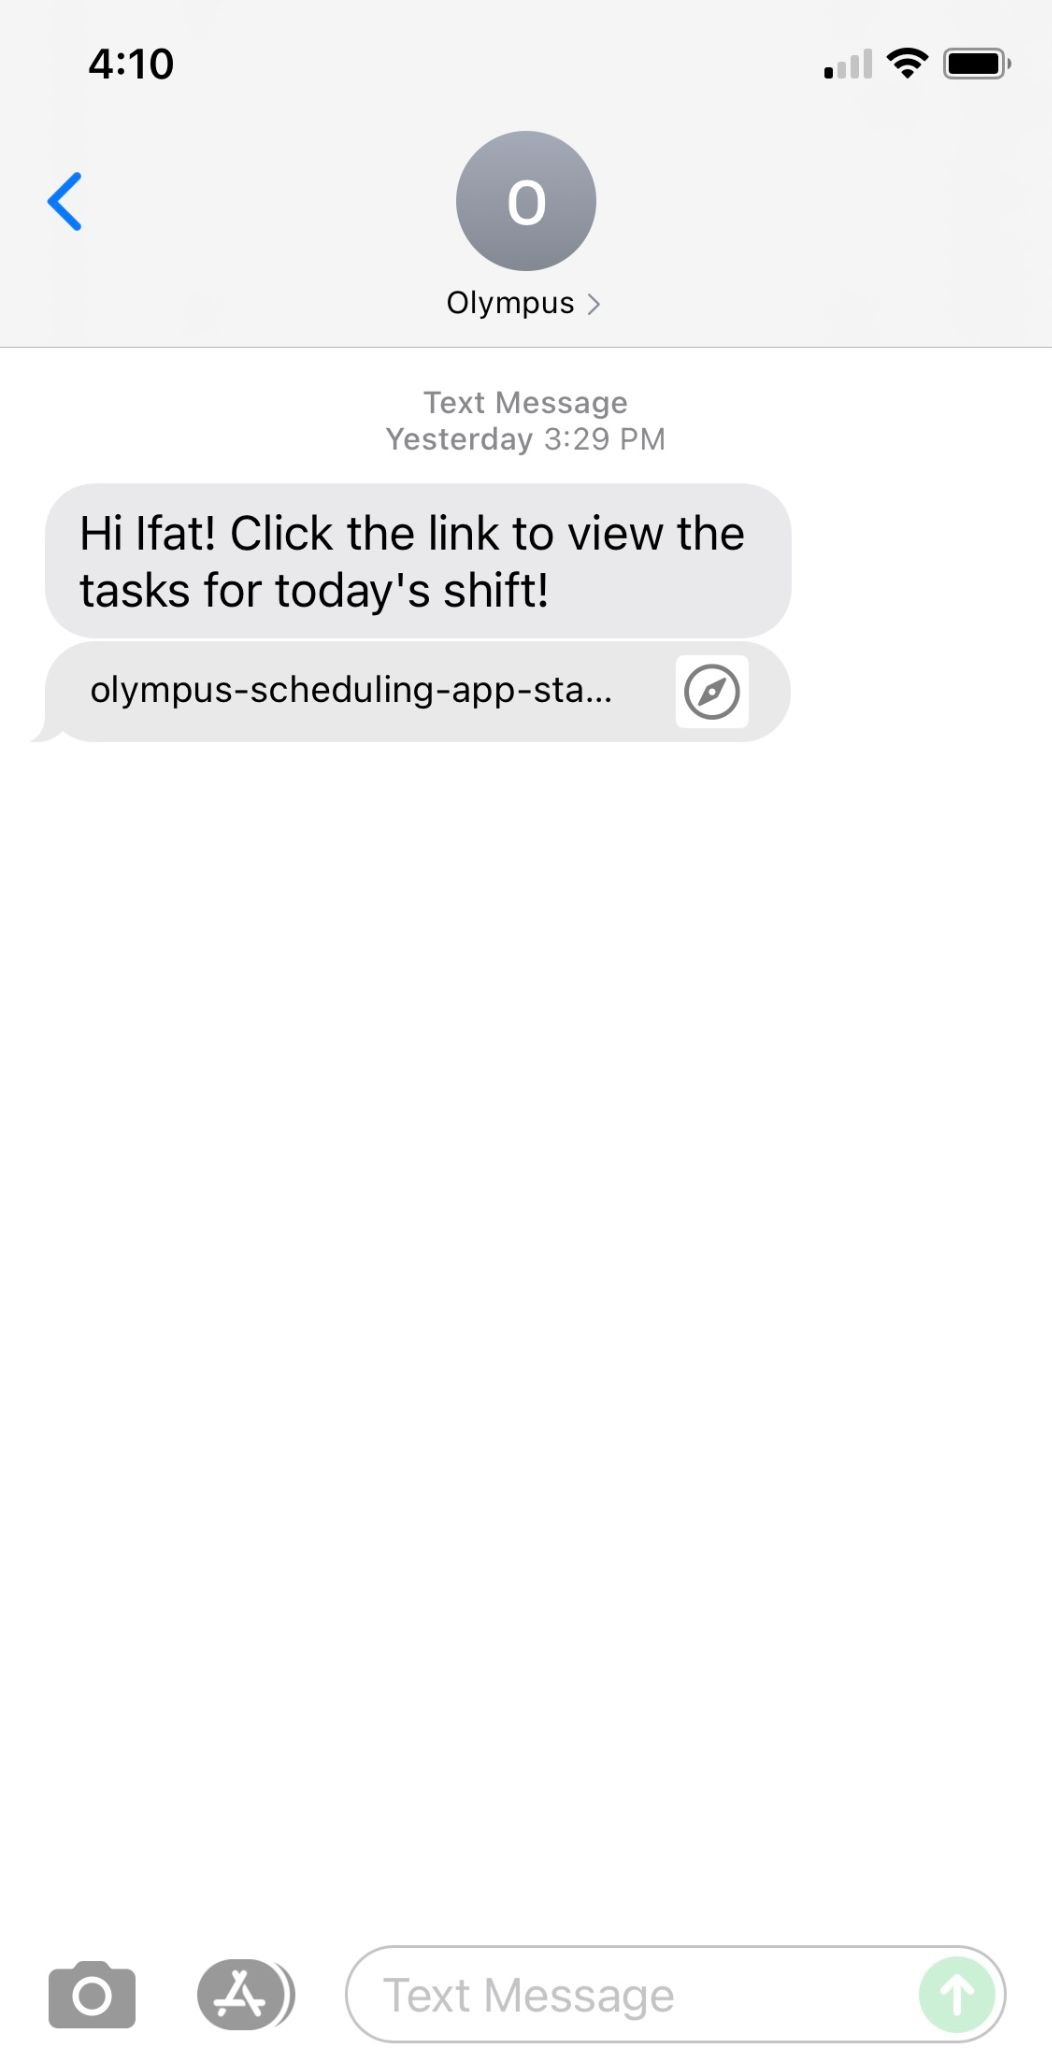 An example text message from the Olympus app